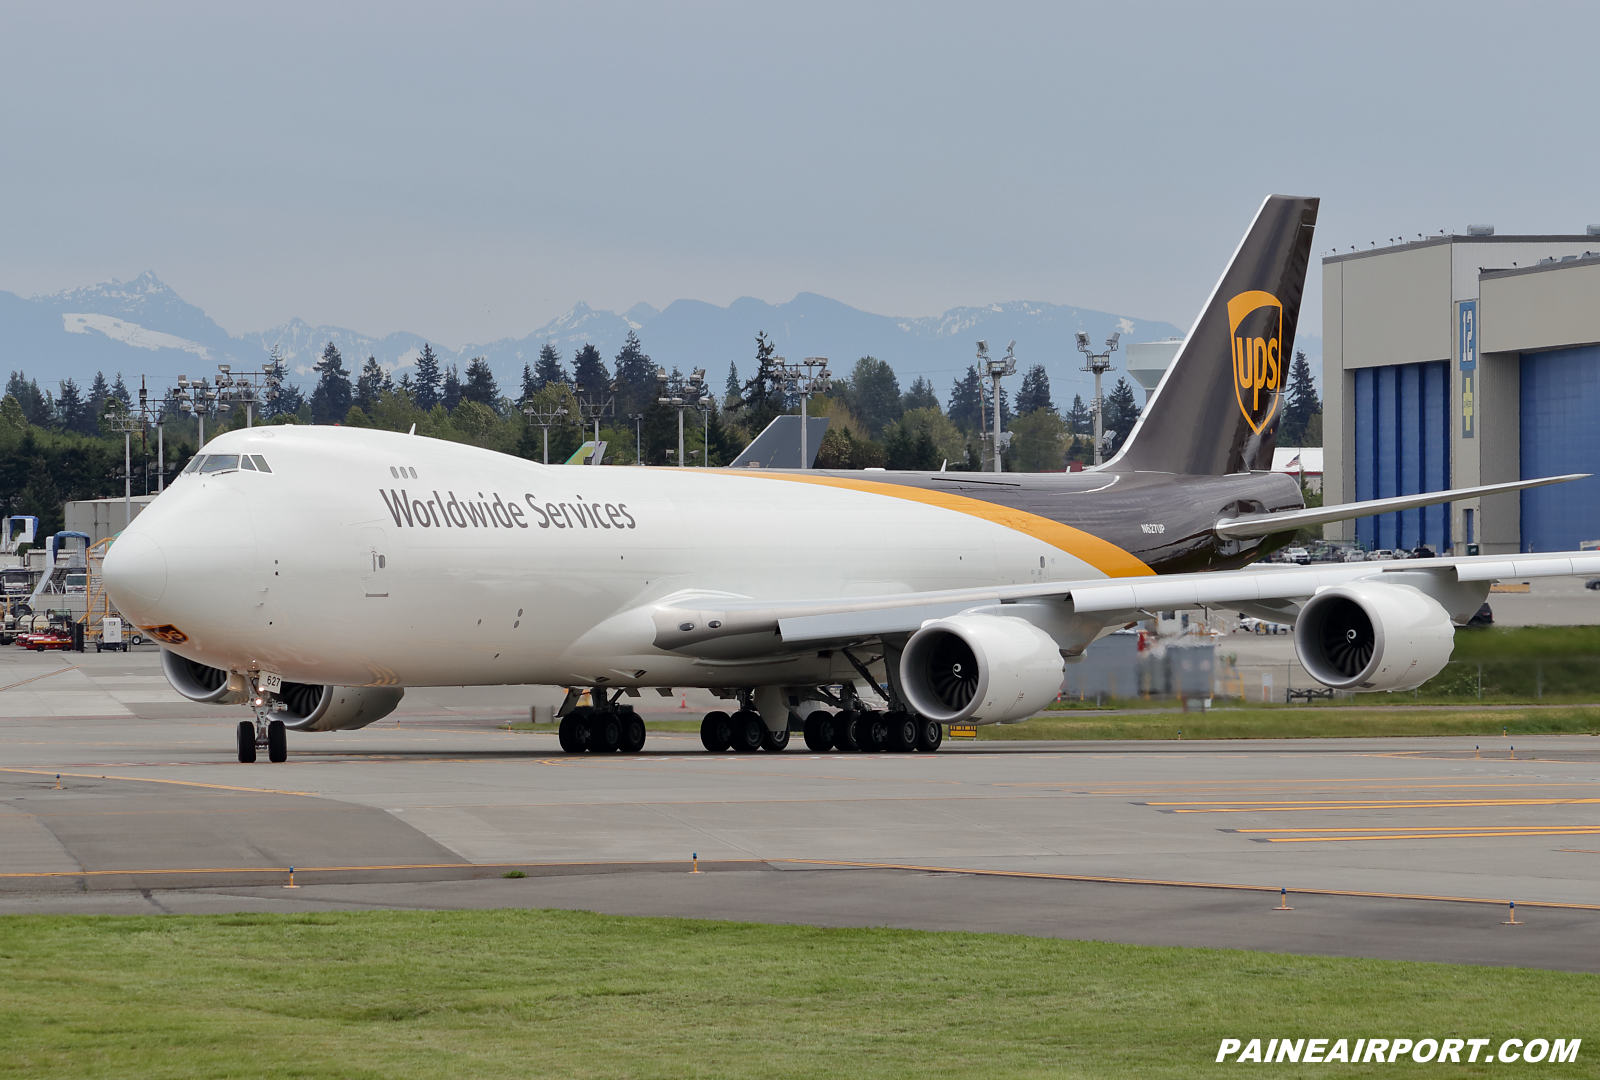 UPS 747-8F N627UP at KPAE Paine Field